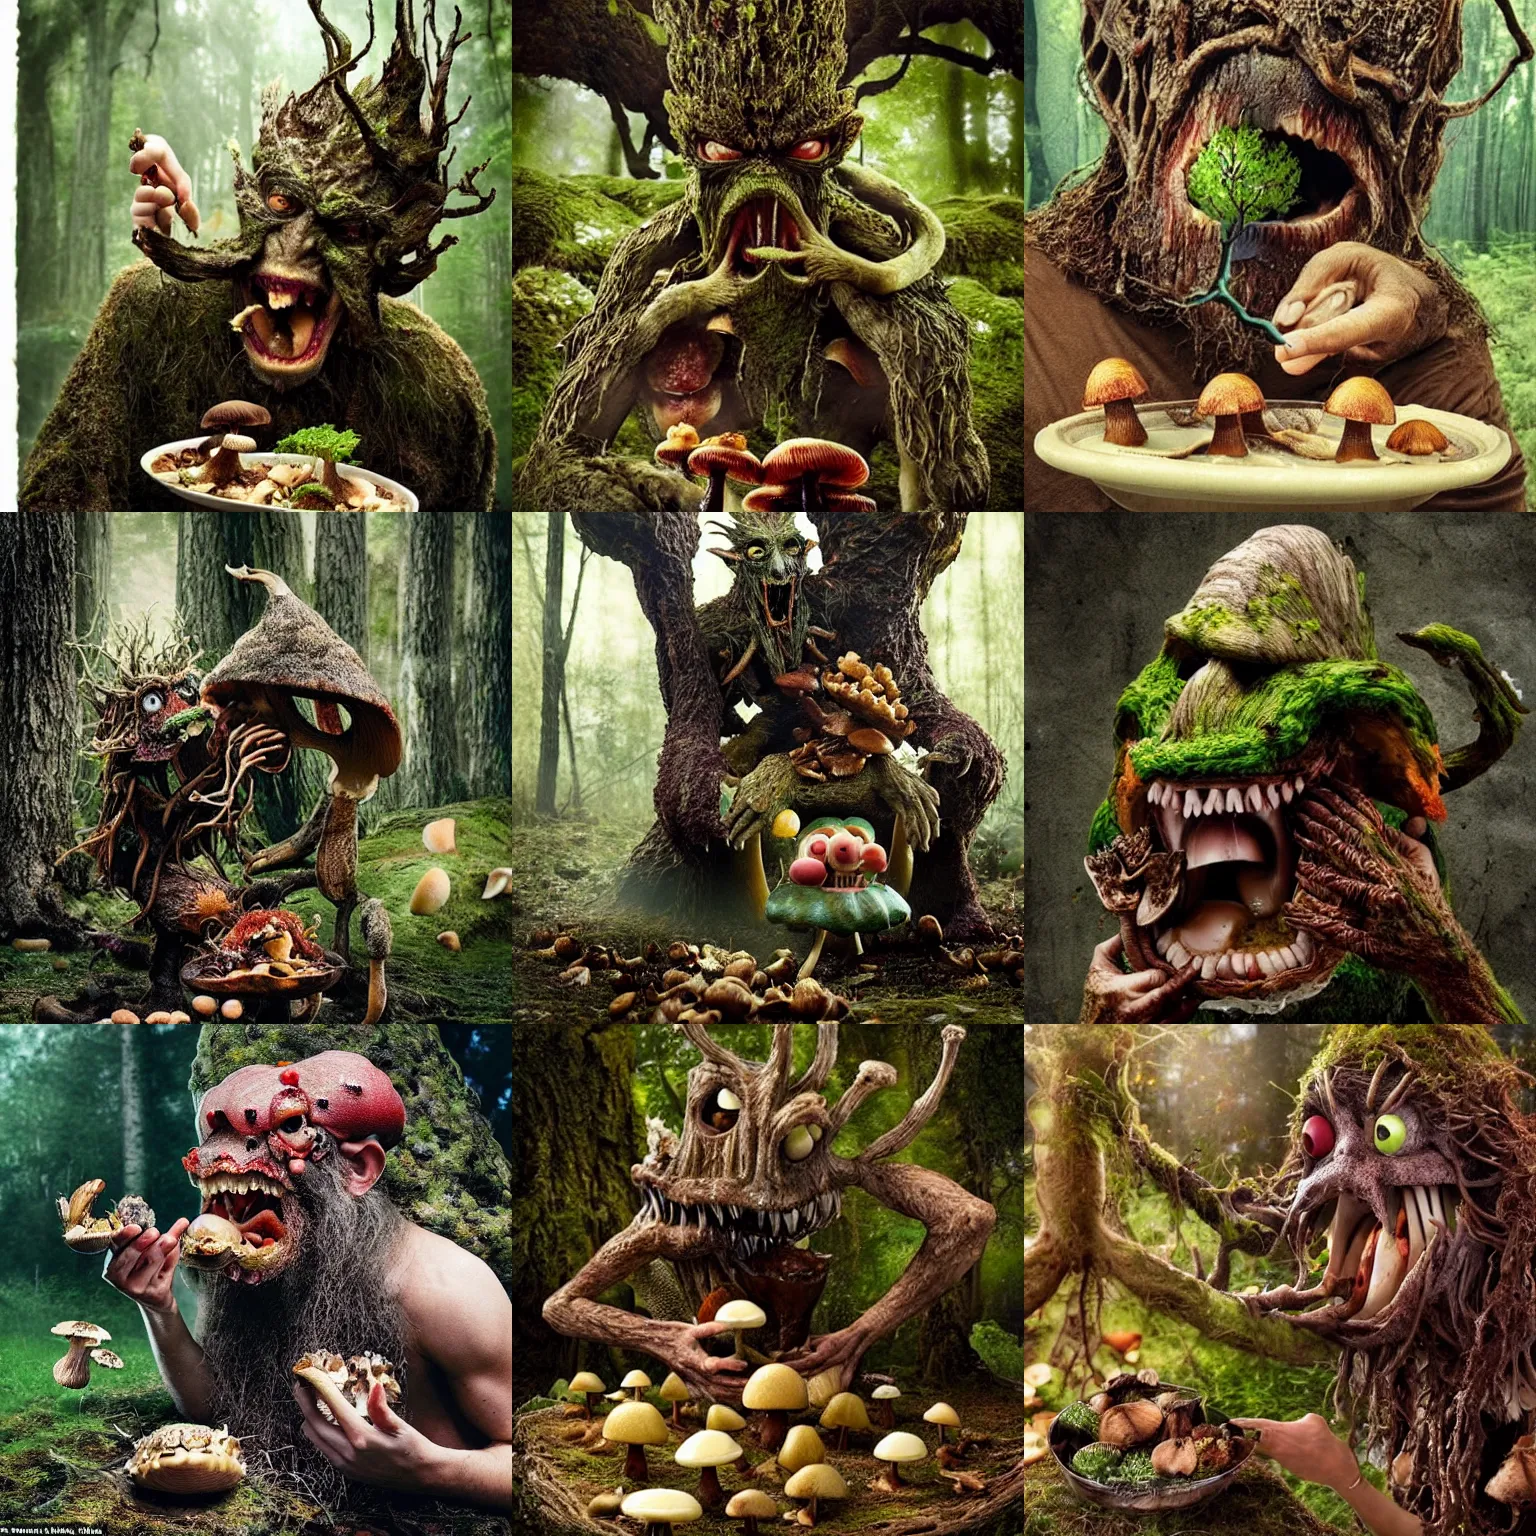 Prompt: photograph of a hungry angry treebeard savagely stuffing mushrooms into his gaping maw 🍄, dark fantasy horror